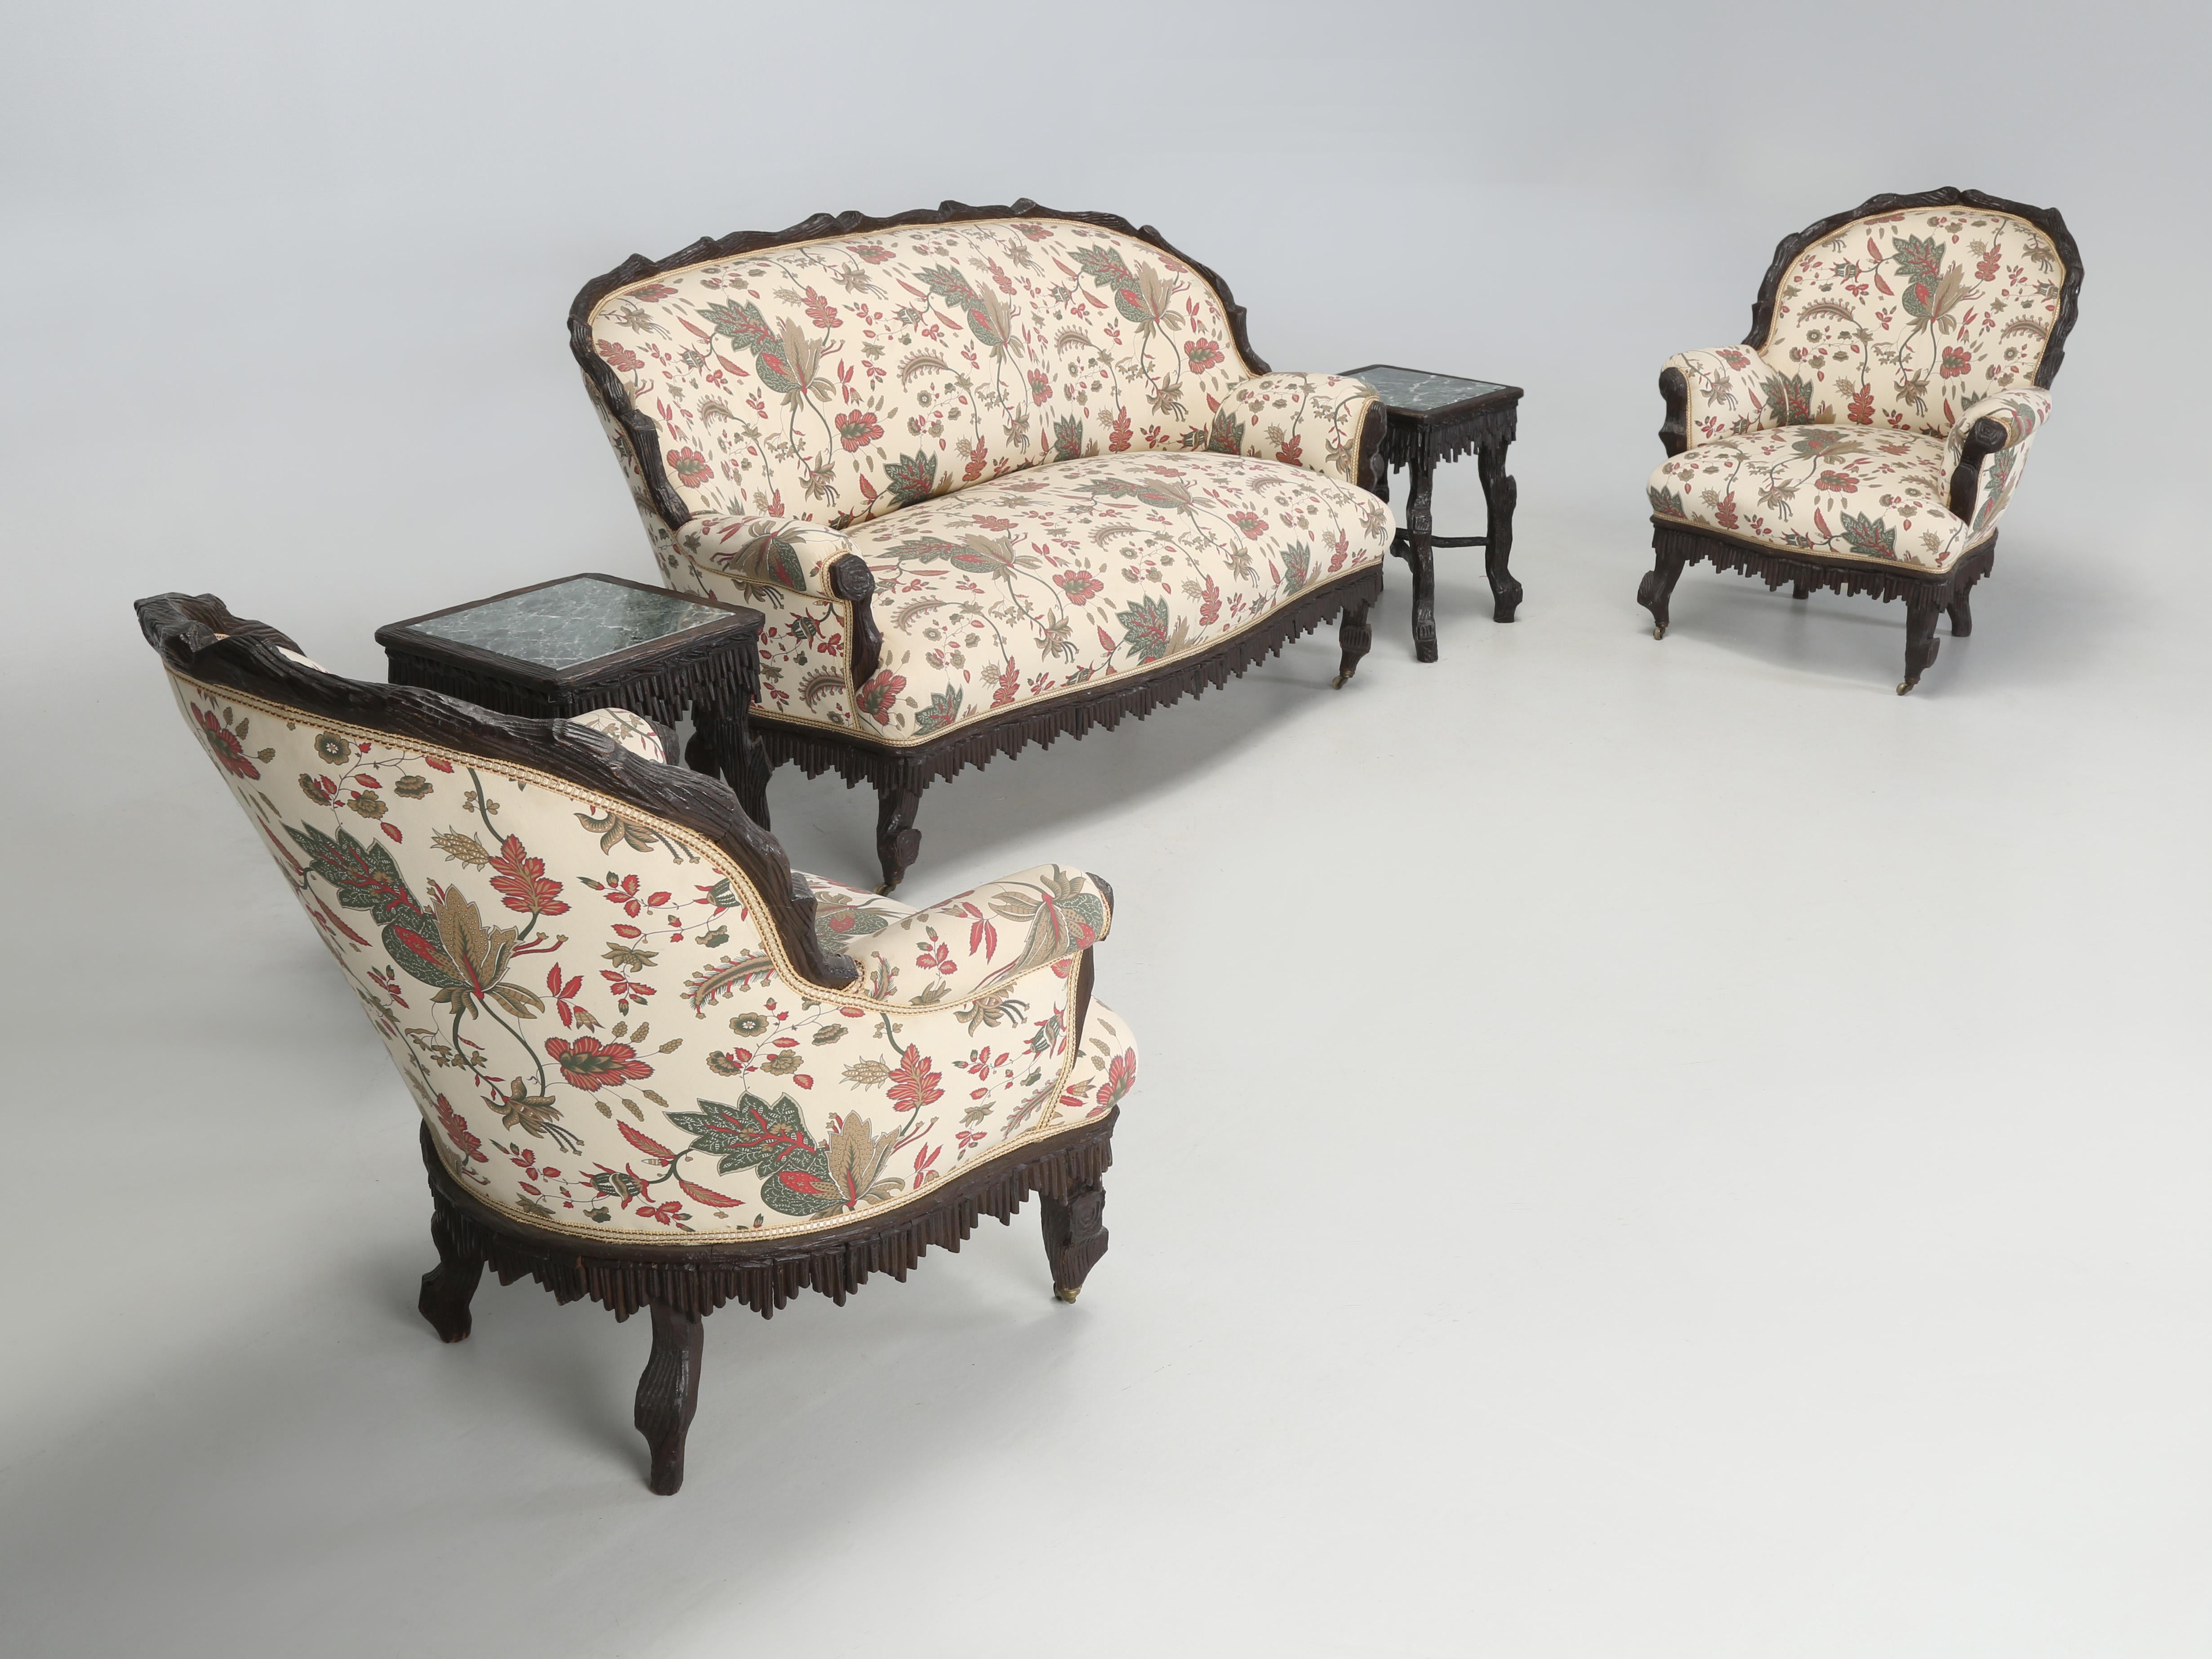 Linen version of Old Plank's Black Forest furniture. We look at Black Forest furniture as being both a bit rustic and a little whimsical. Black Forest furniture dates from the late 1800’s to the early 1900’s and although most people believe Black